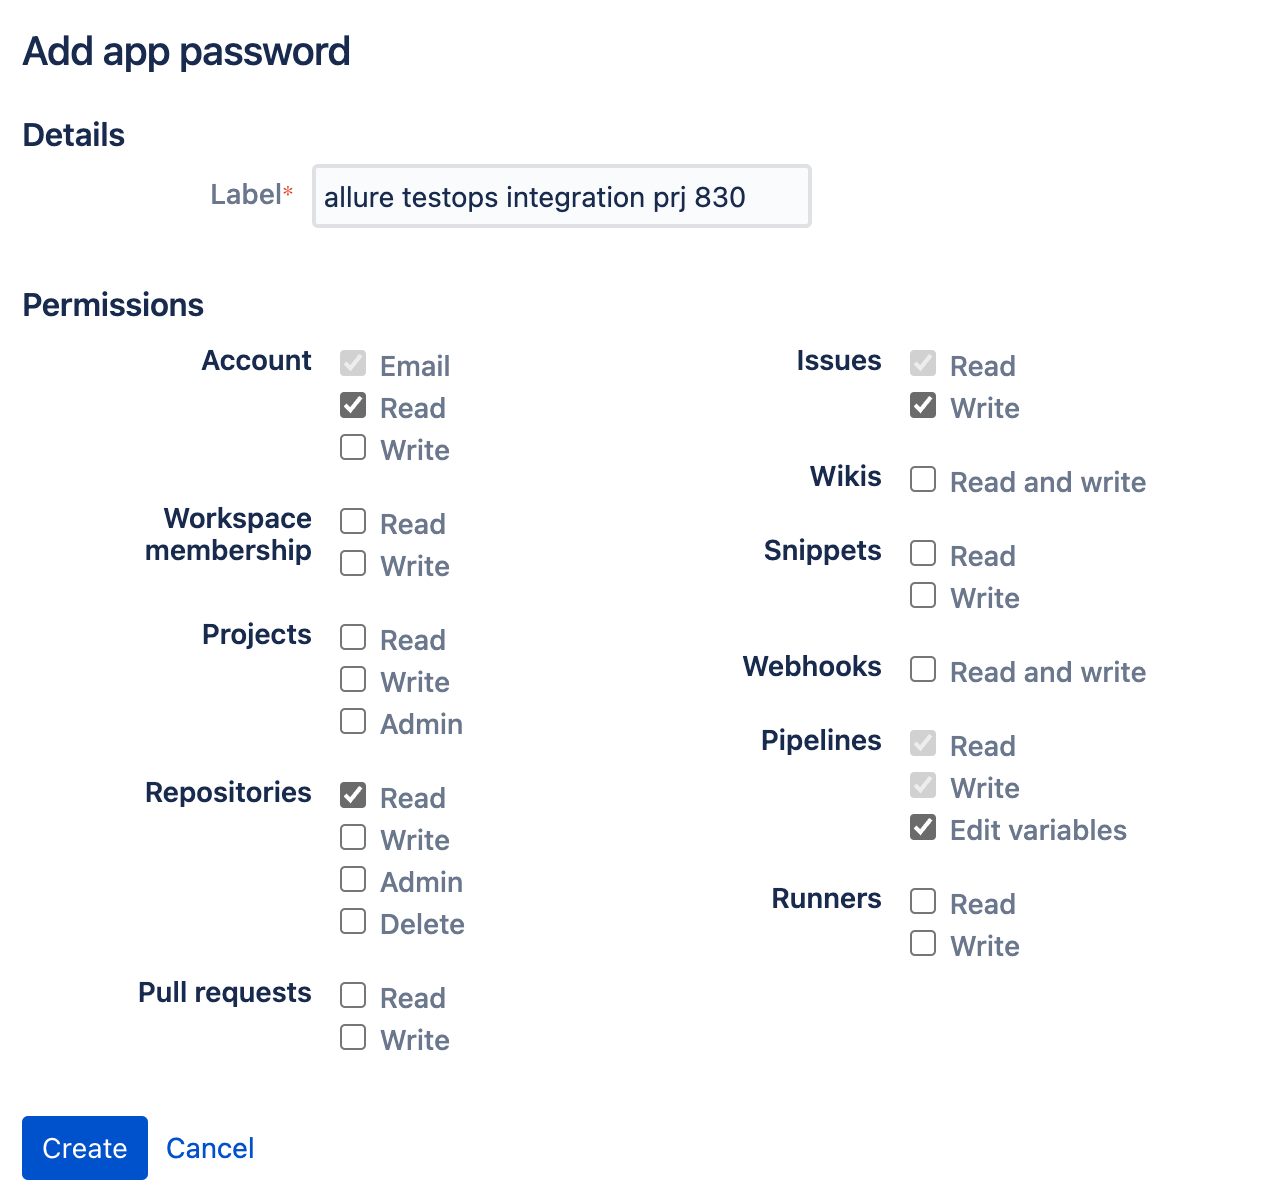 Parameters for the App password